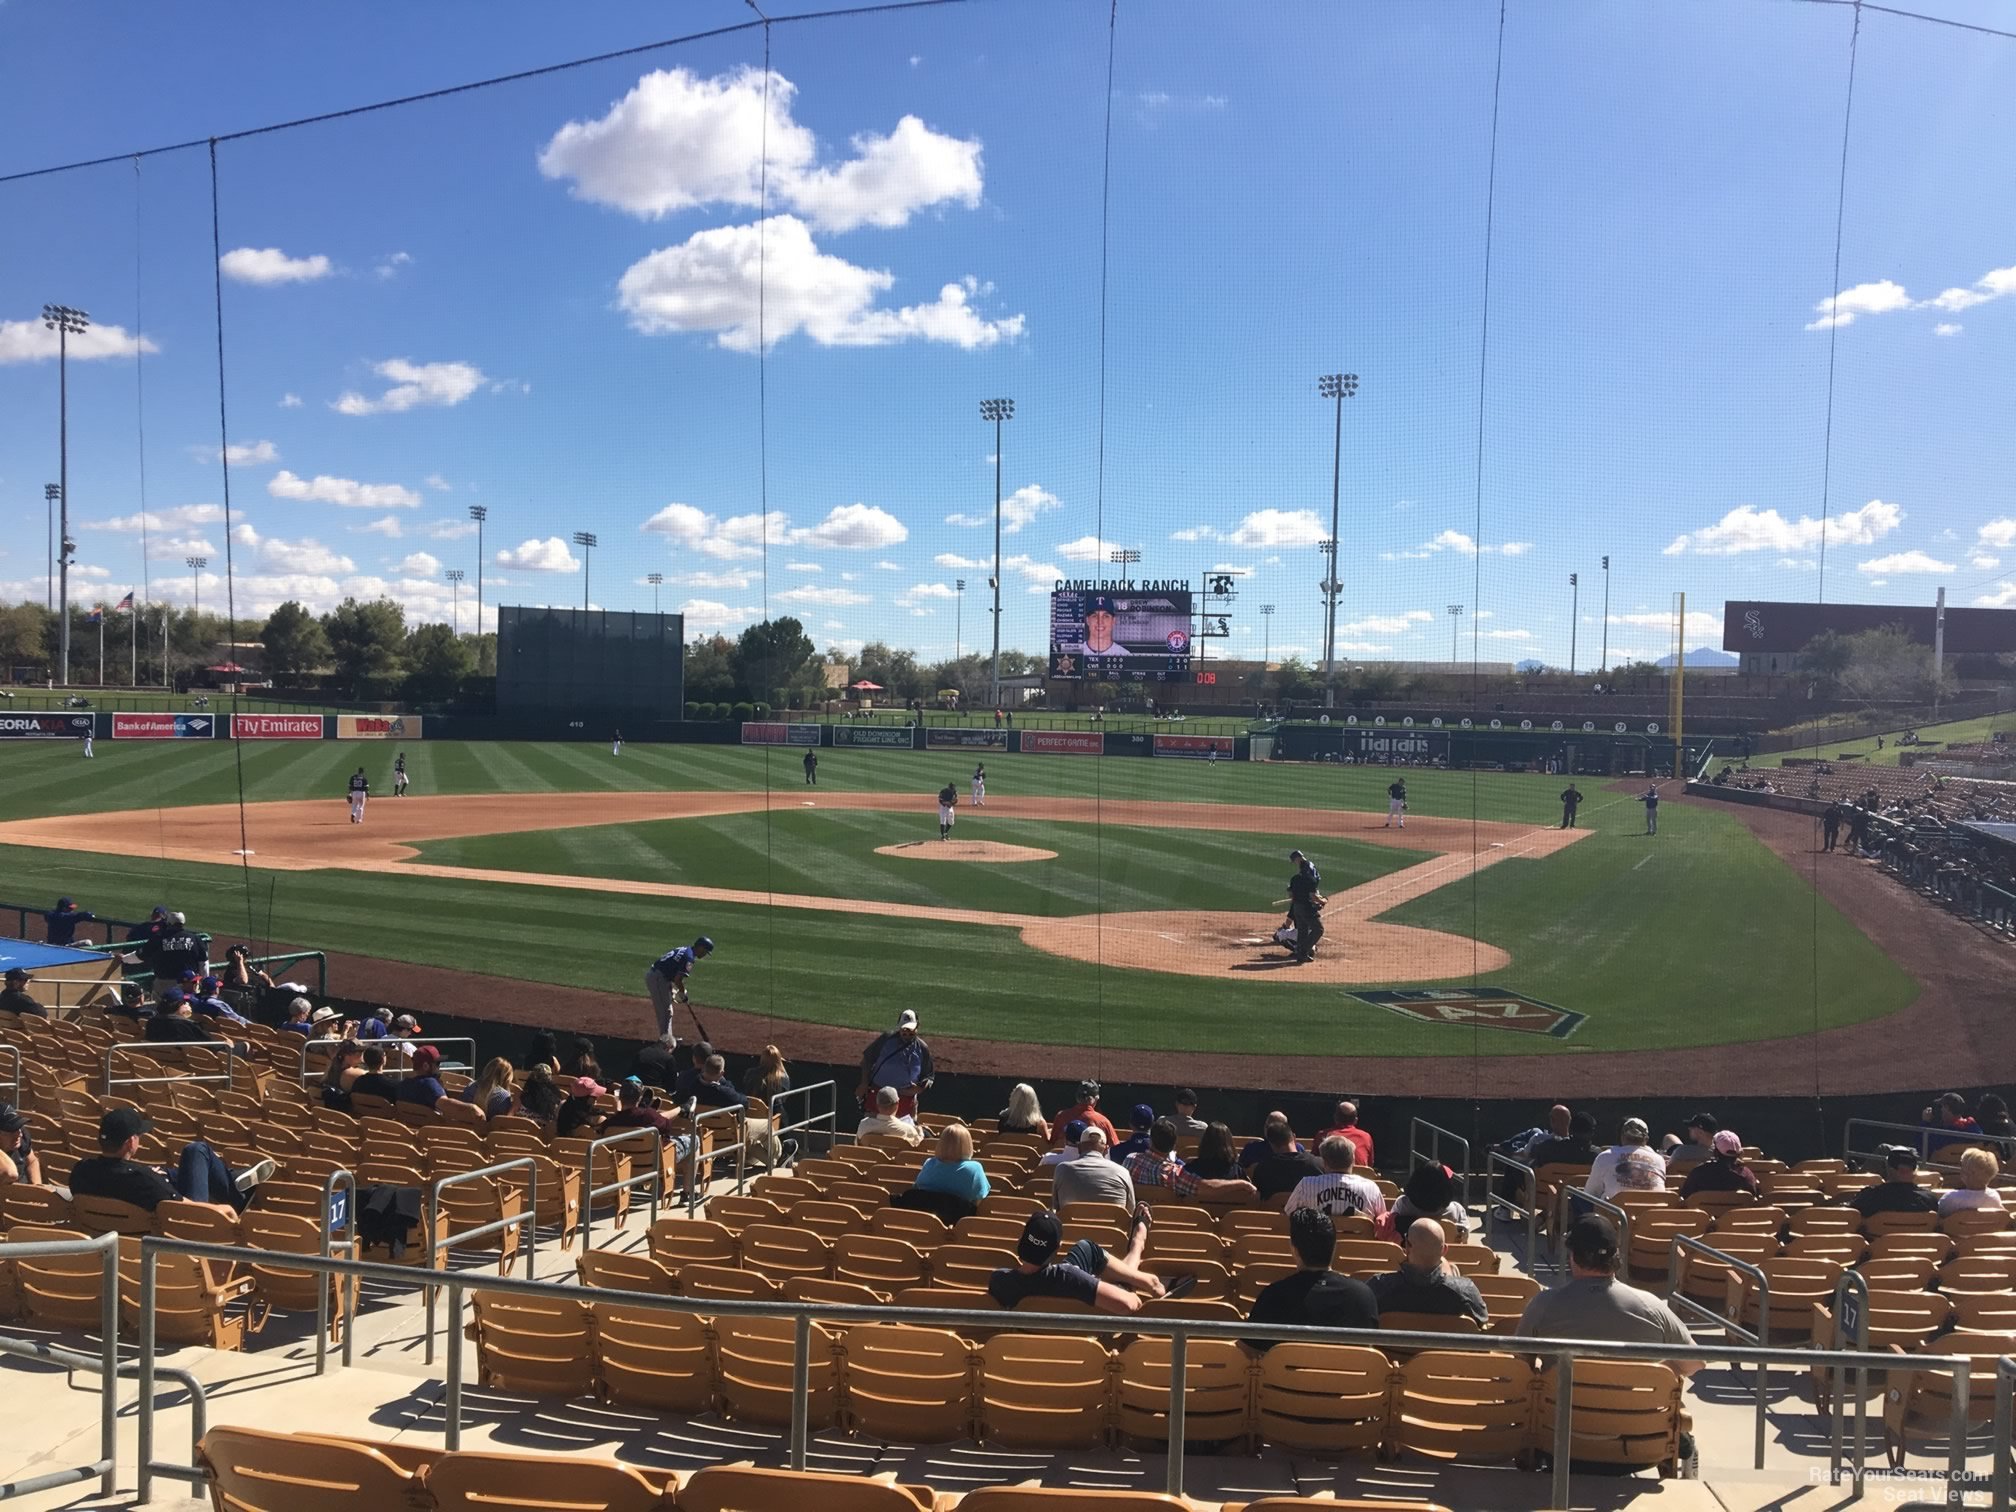 section 117, row 5 seat view  - camelback ranch